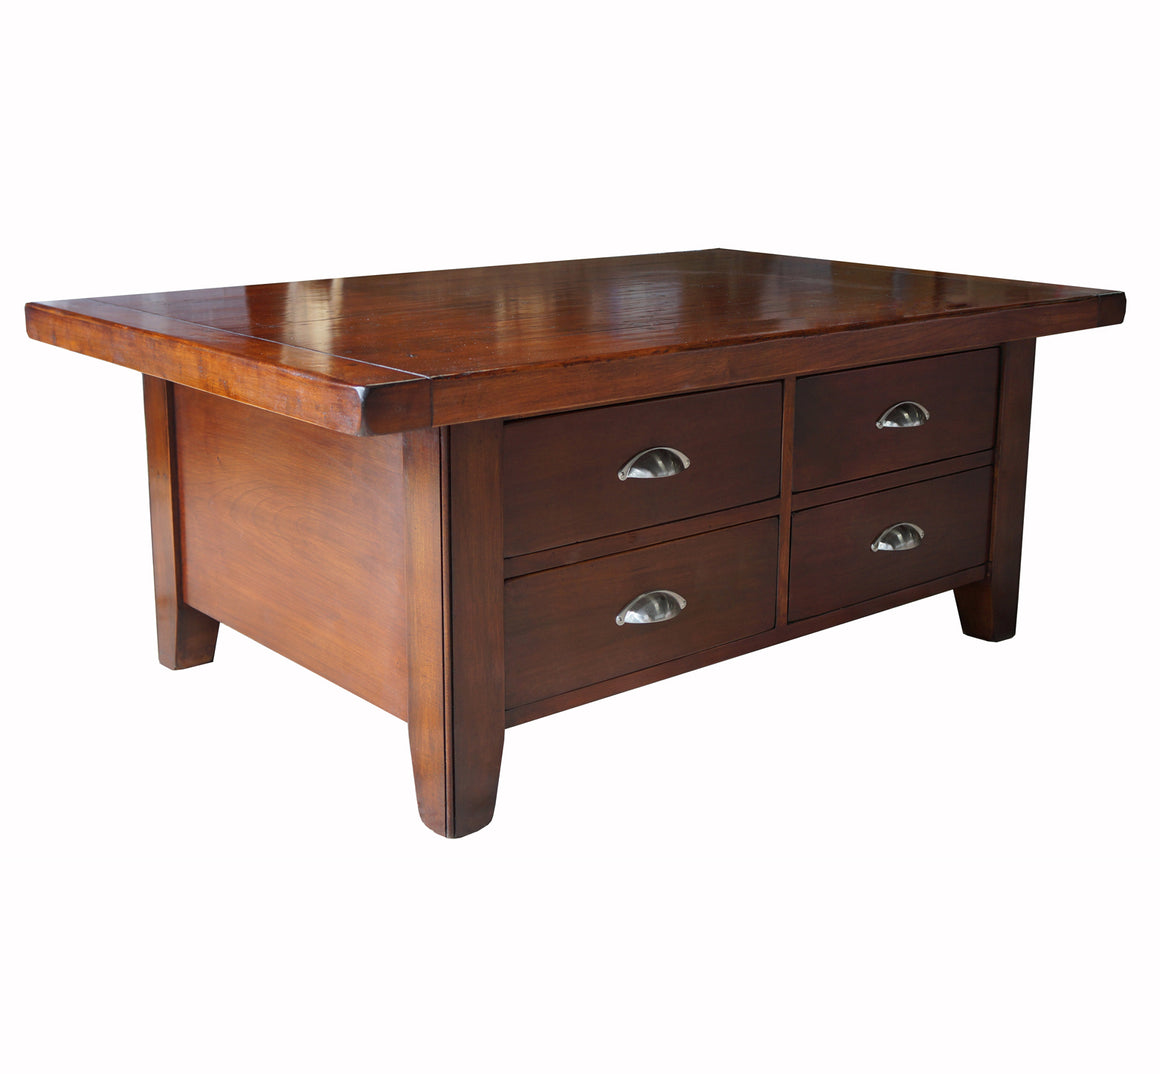 Howard Solid Cherry Wood Coffee Table with Through Drawers